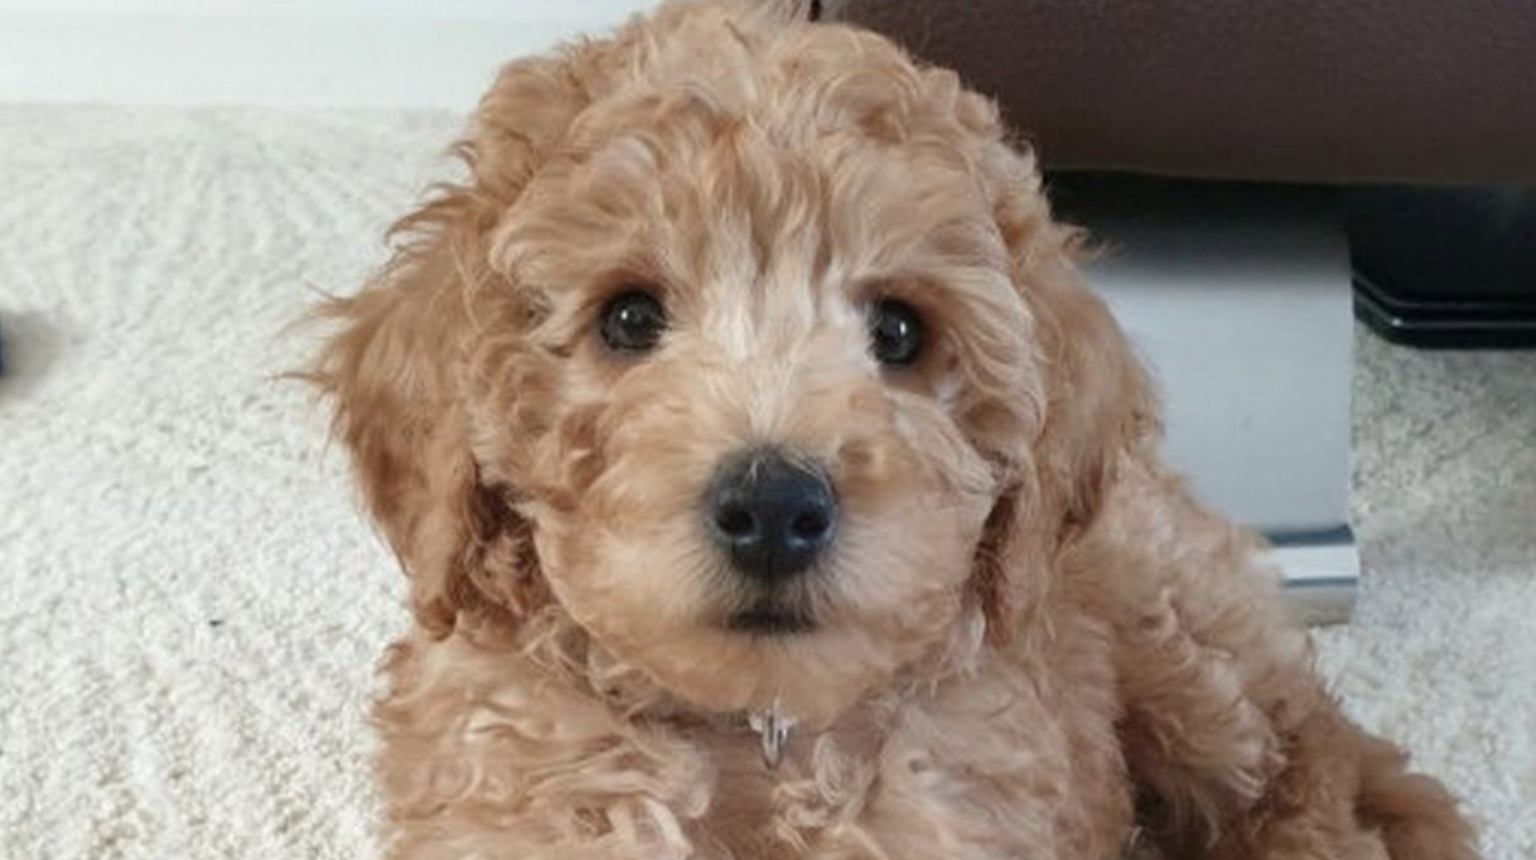 Heartbroken owners forced to put cockapoo puppy to sleep after dog salon visit